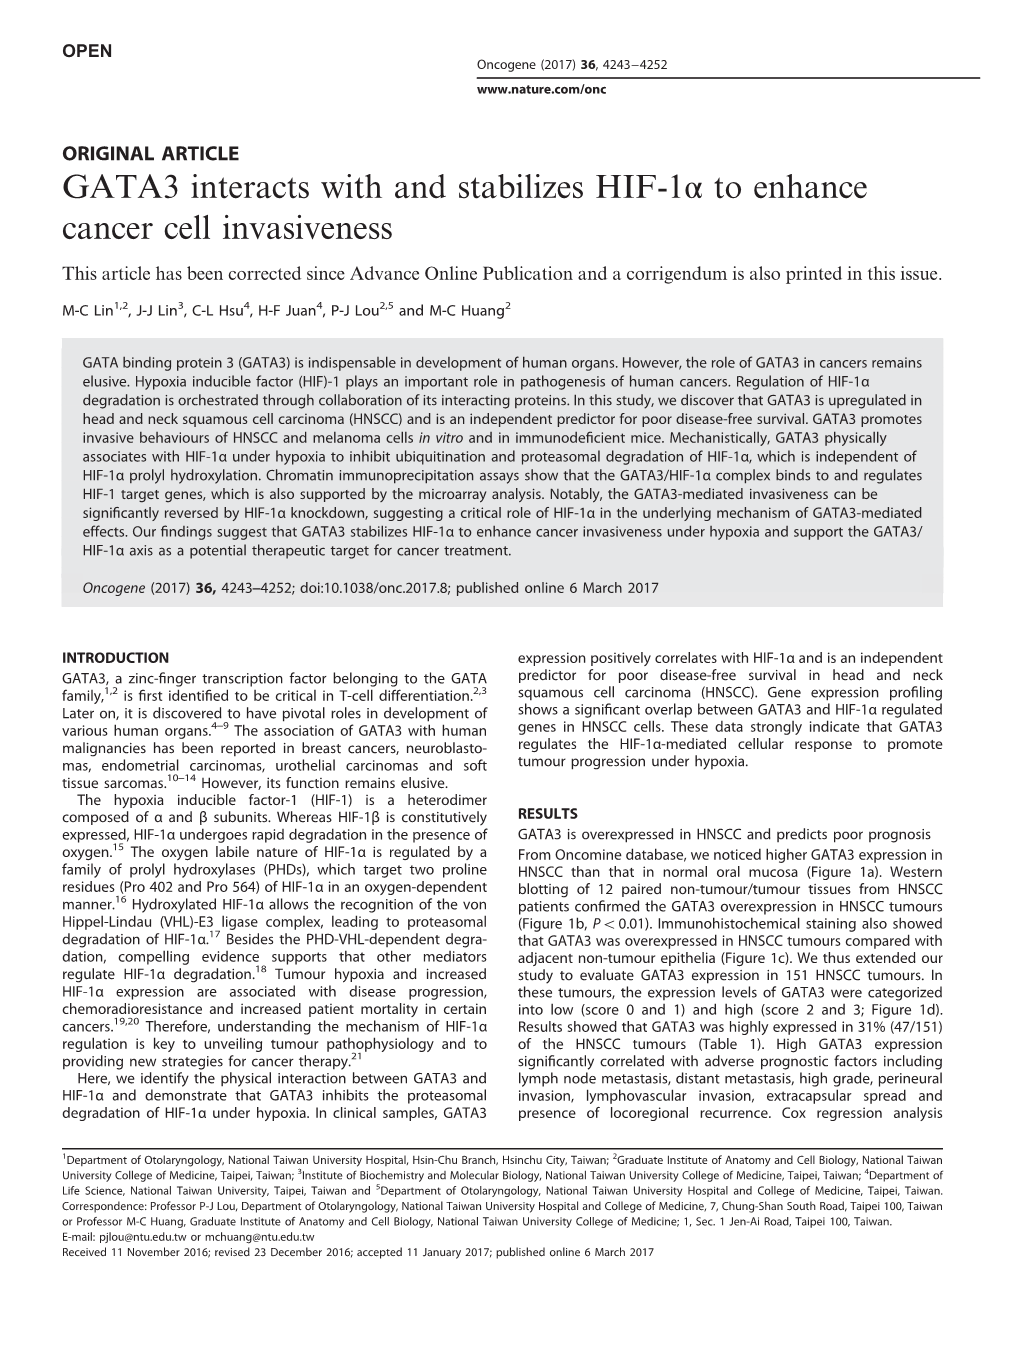 GATA3 Interacts with and Stabilizes HIF-1Α to Enhance Cancer Cell Invasiveness